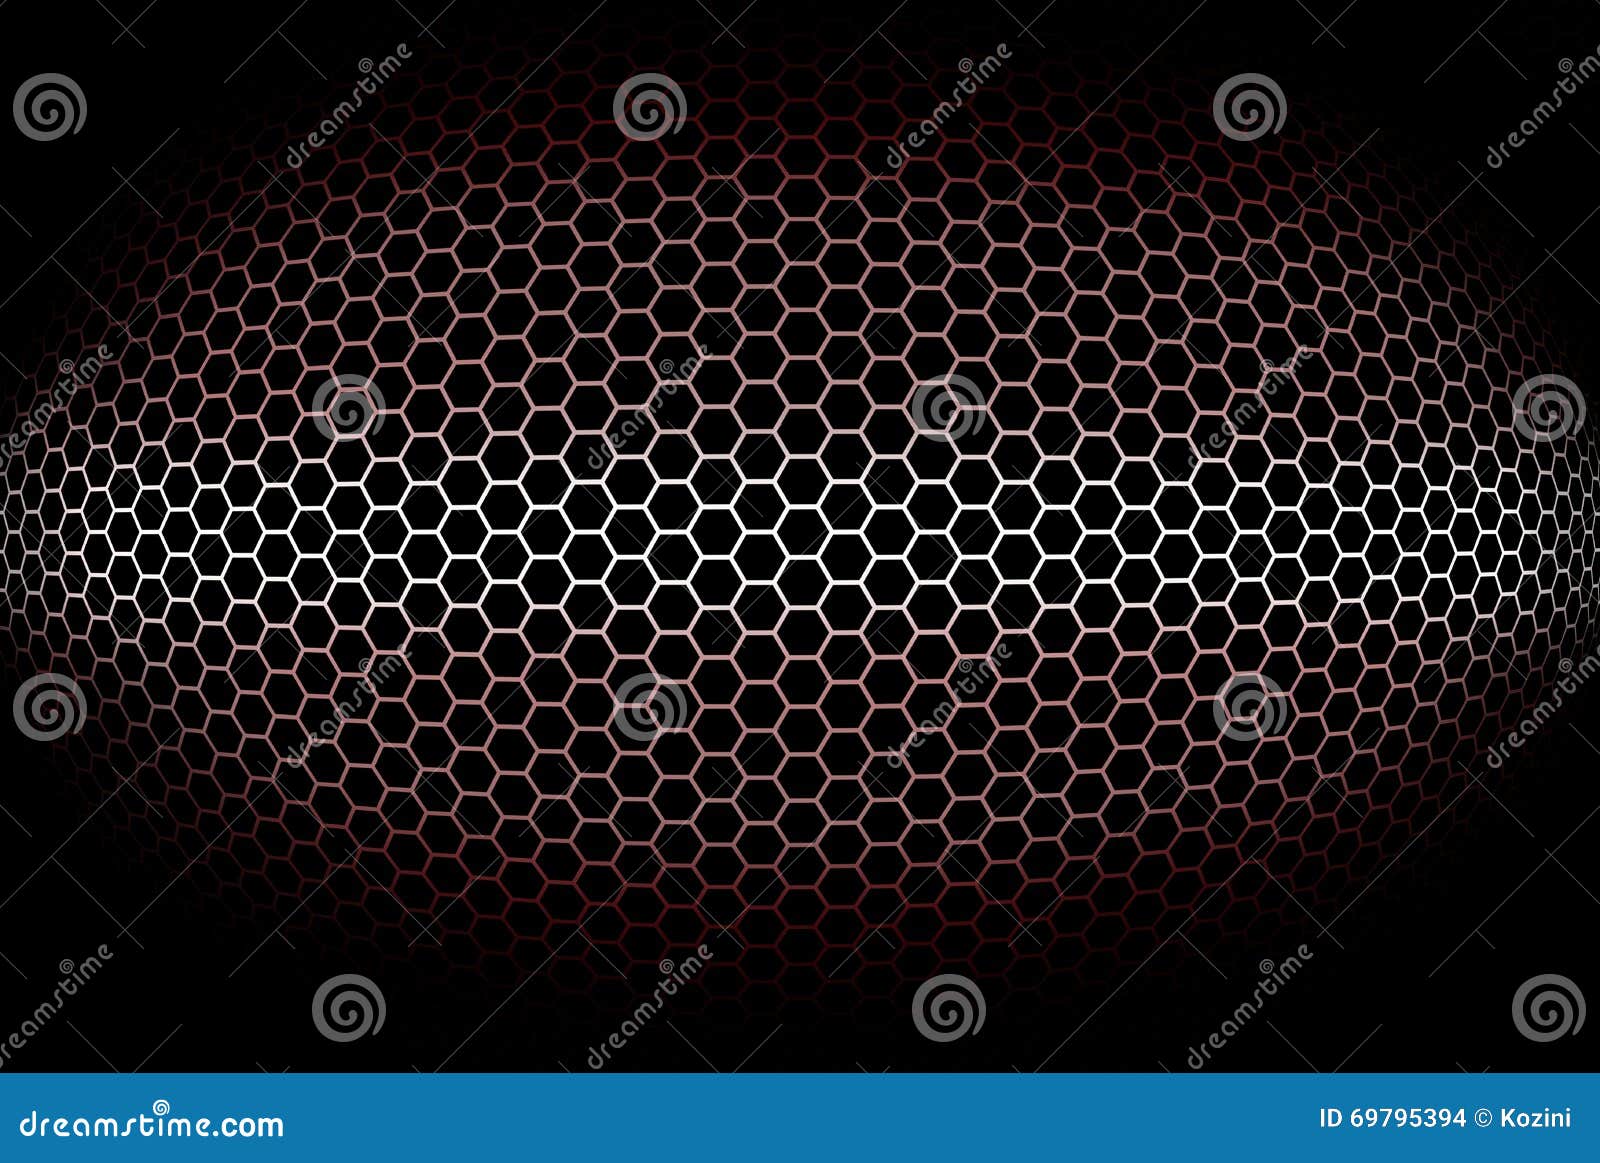 abstract, cylindrical red background with octagonal grid